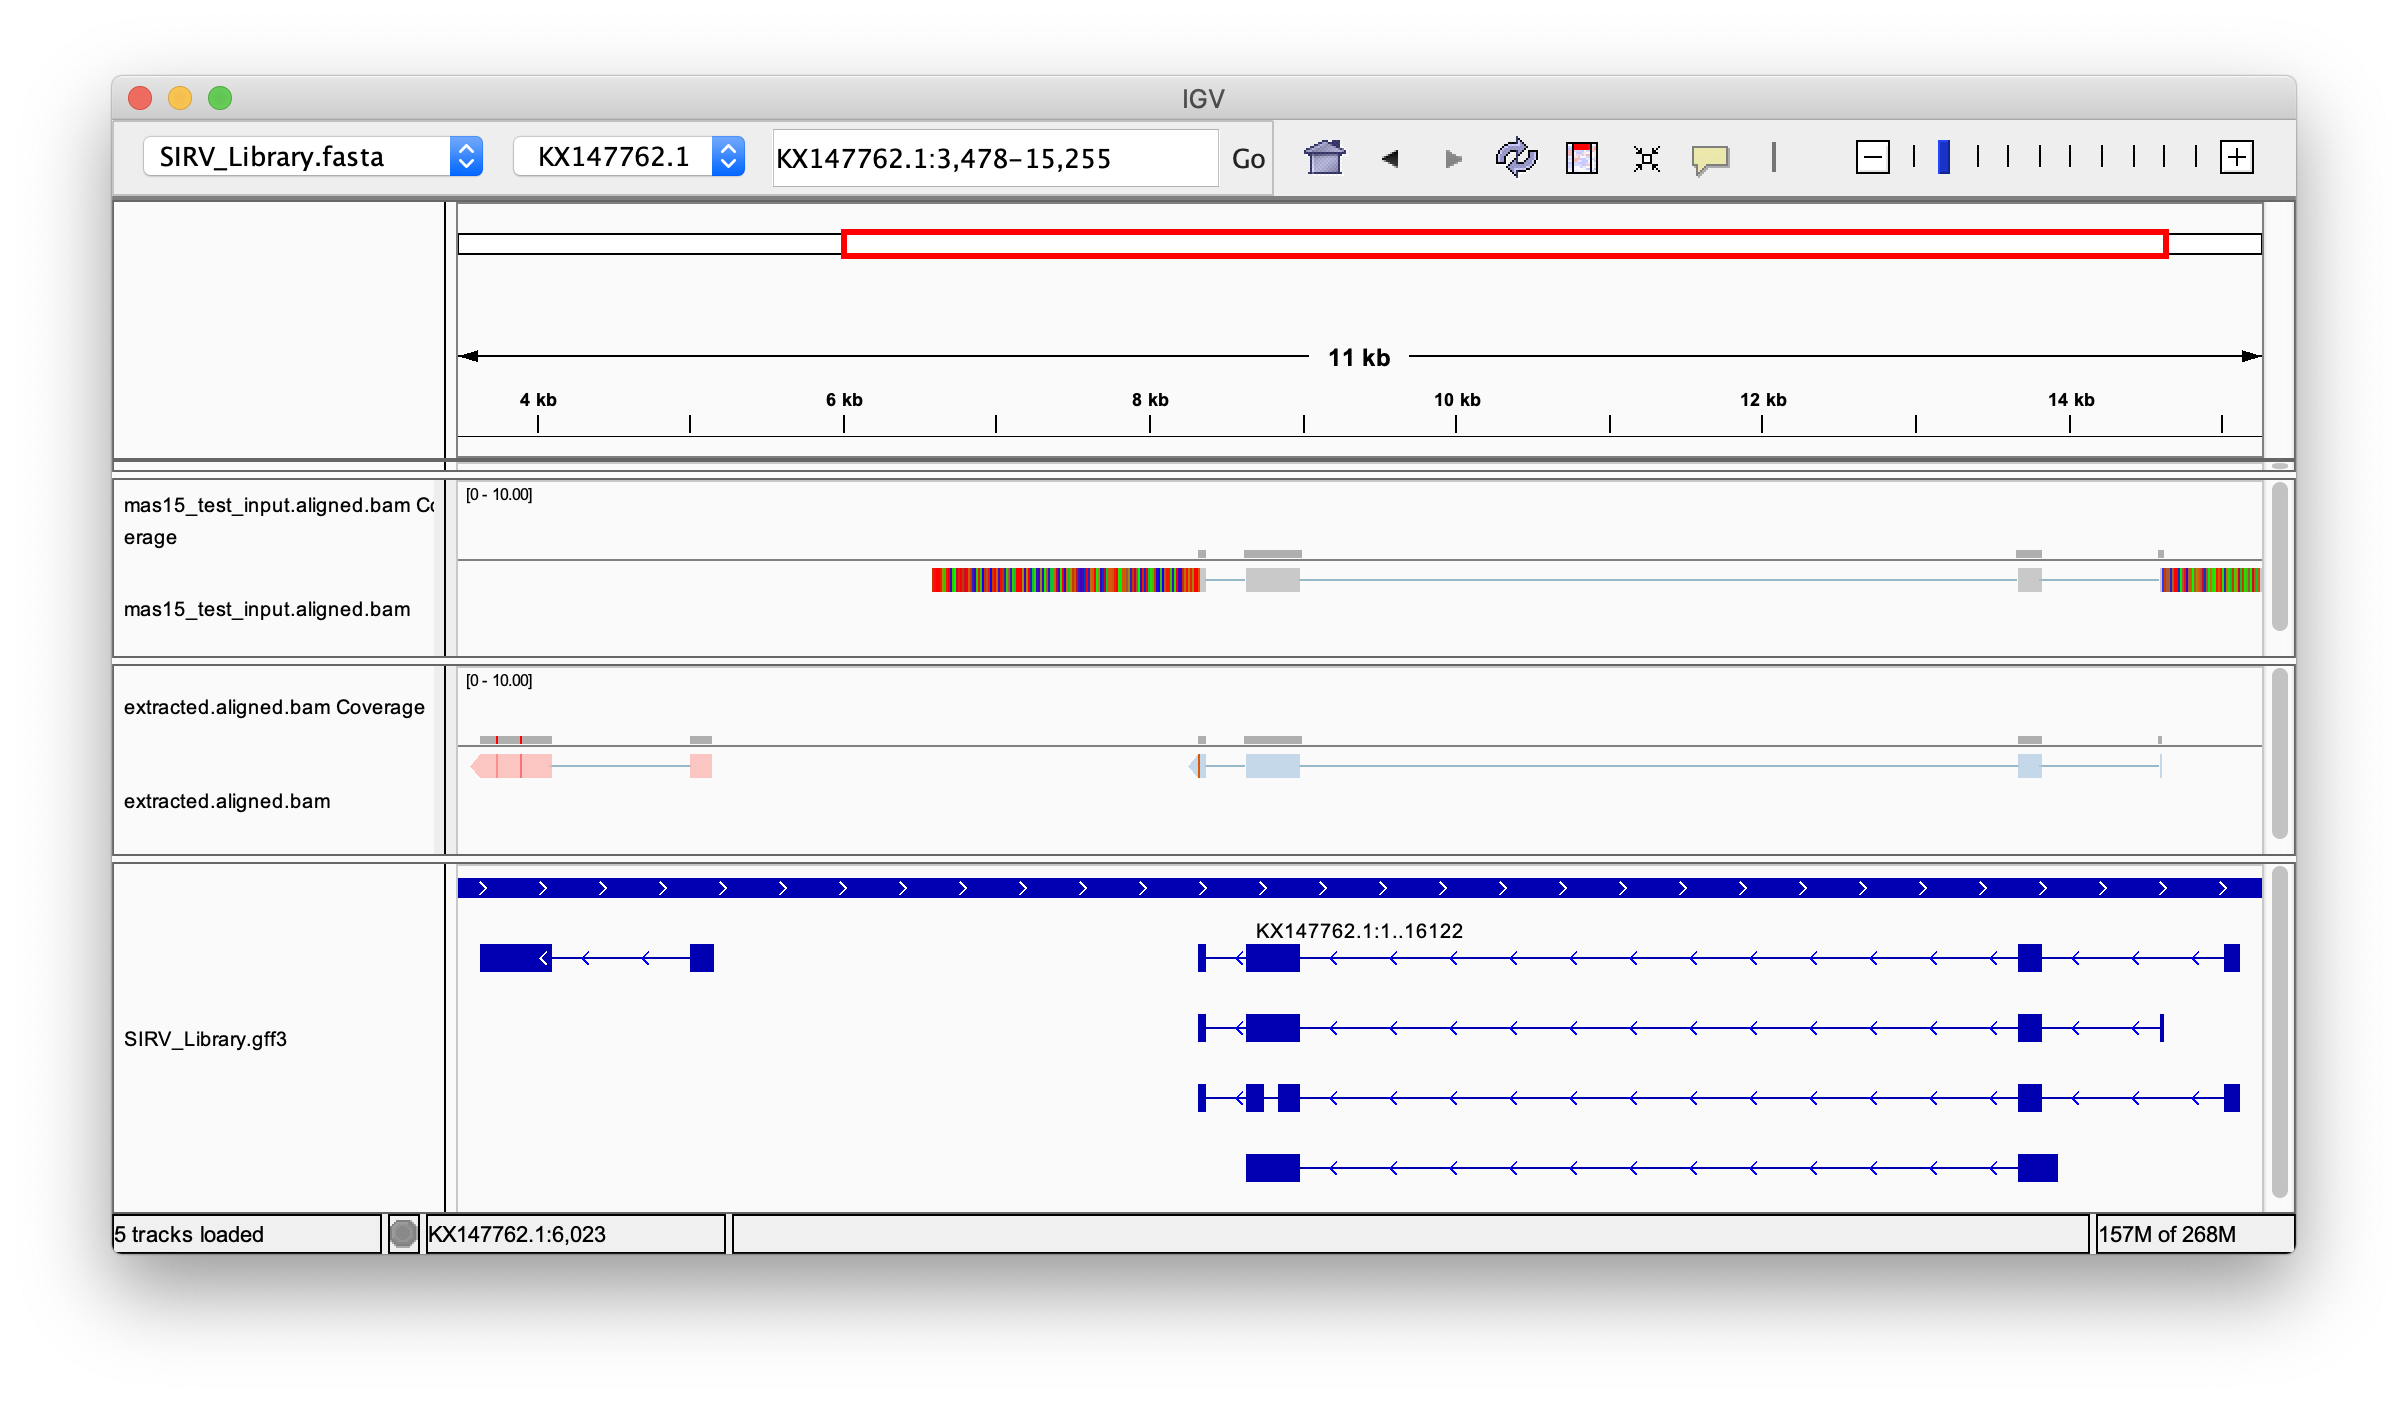 IGV screenshot for two SIRV isoforms